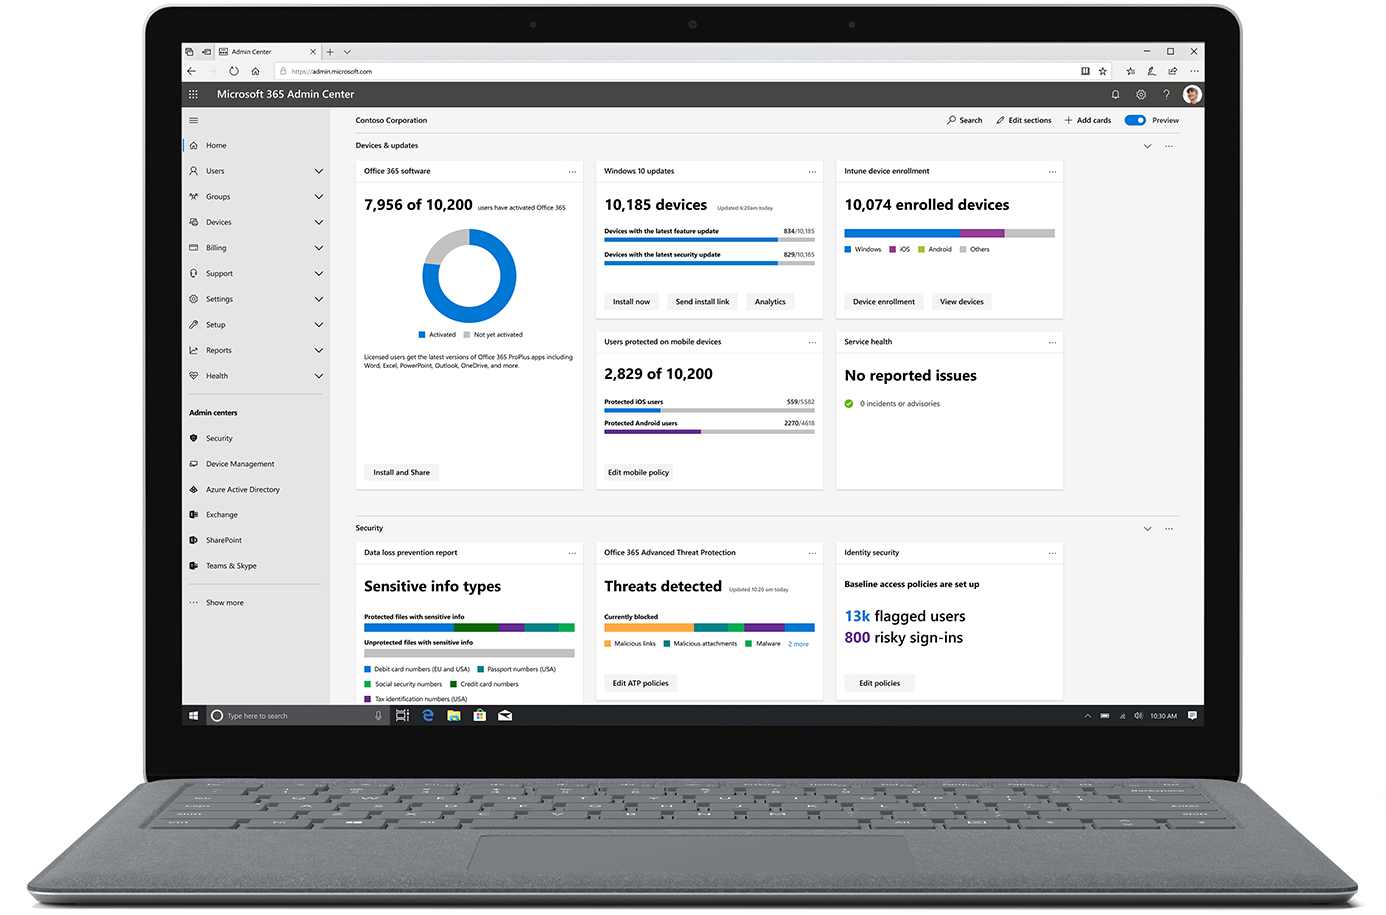 Image shows the Microsoft 365 admin center on an open laptop.